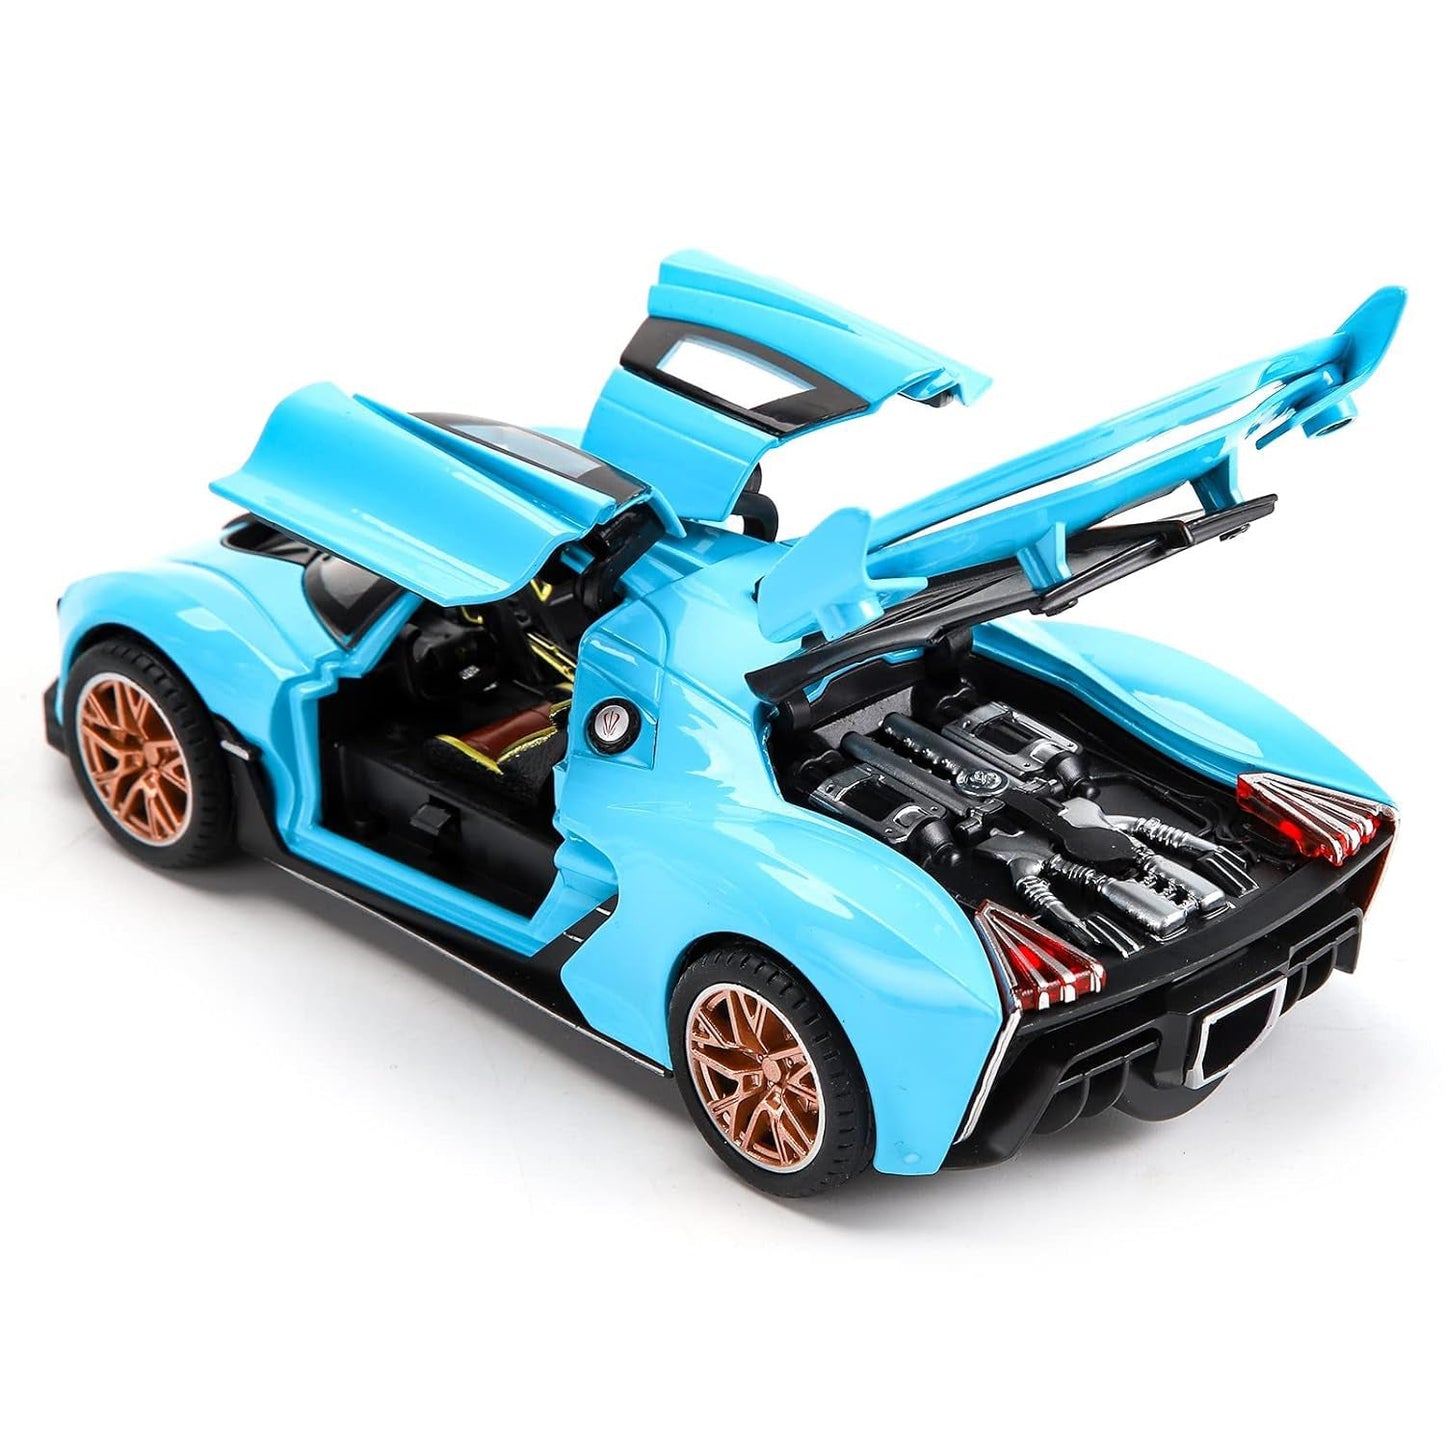 Sport Car Model with Fog Stream Cool Lights Sounds and One Key Open Door Collectible Toys Vehicle for Adults and Kids Gifts for Boys and Girls (Blue)